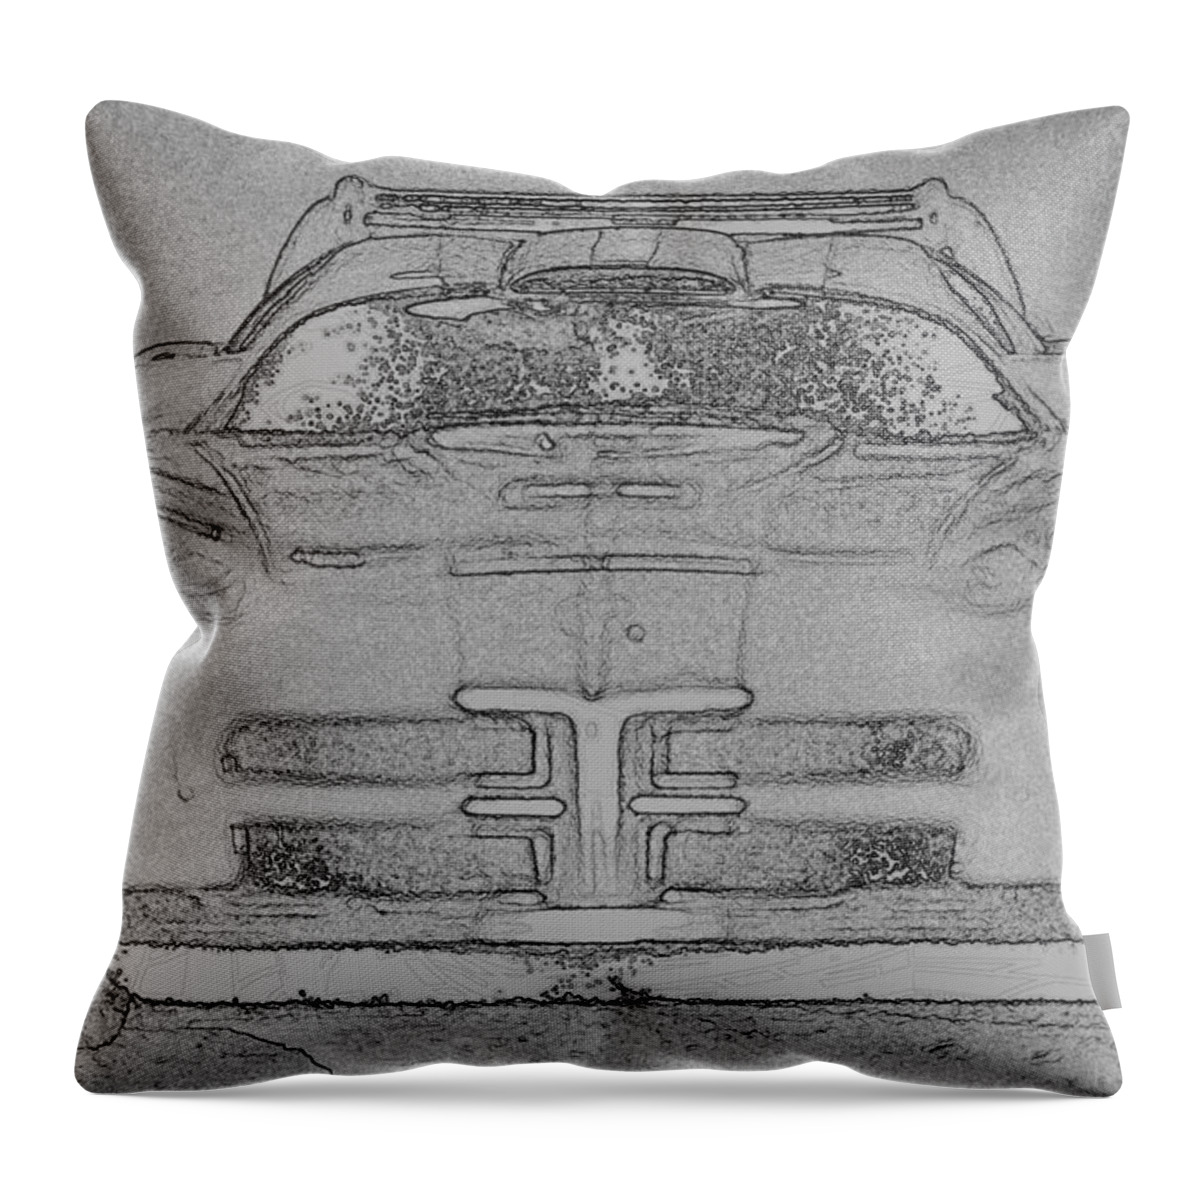 Dodge Throw Pillow featuring the digital art Charcoal Viper by Lin Grosvenor